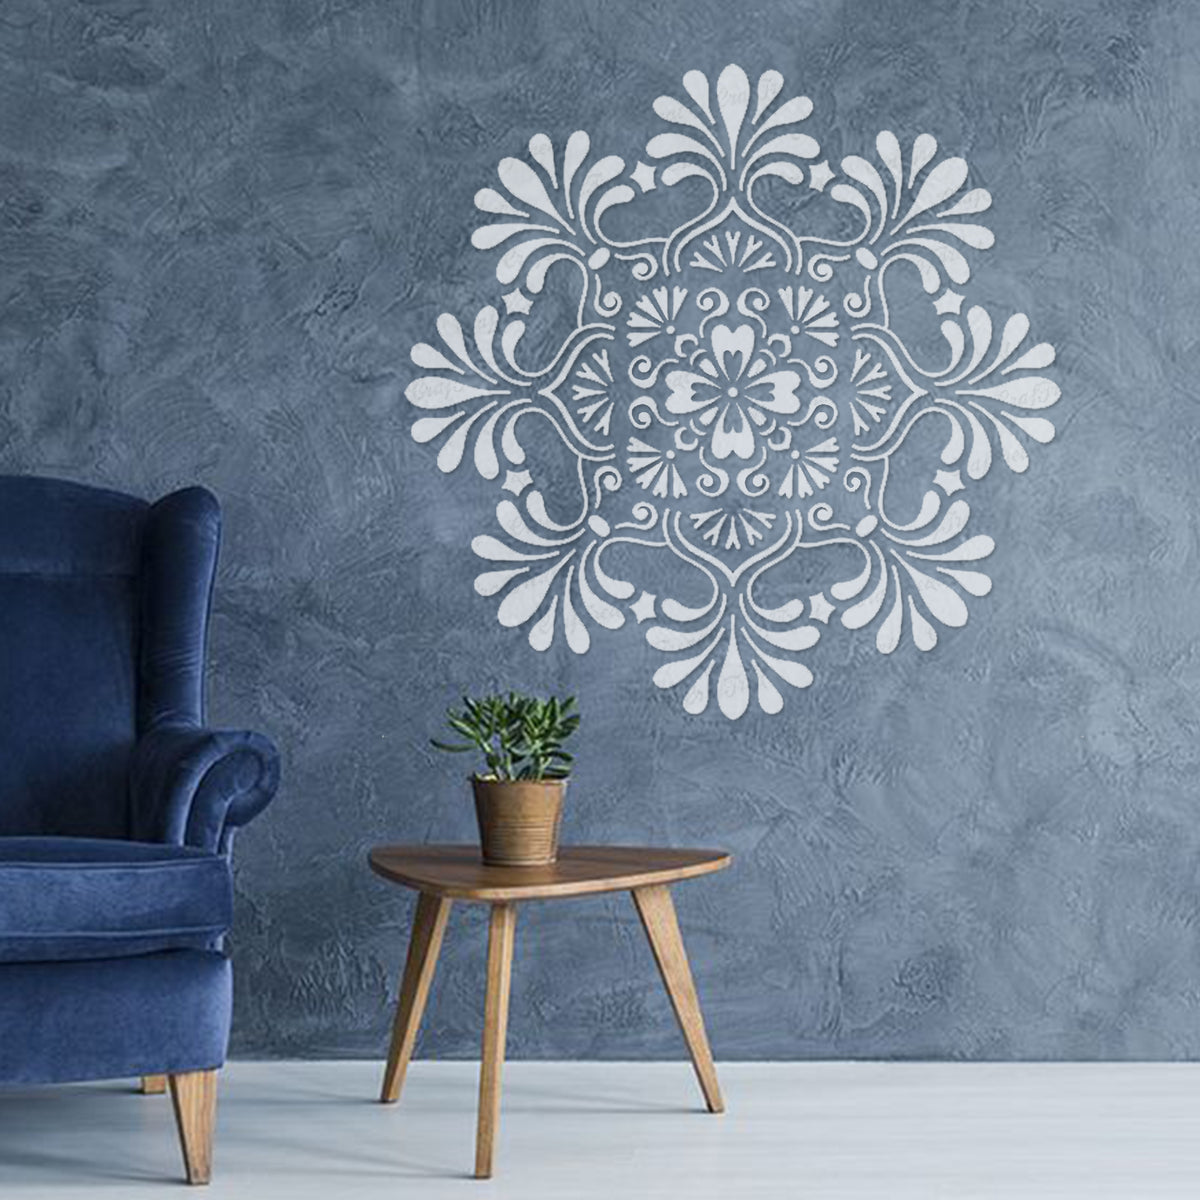 craftreat-mandala-2-wall-stencils-for-painting-stencil-mandala,-reusable- mandala-pattern-stencils-for-walls-21x21-inches-ctws003 —